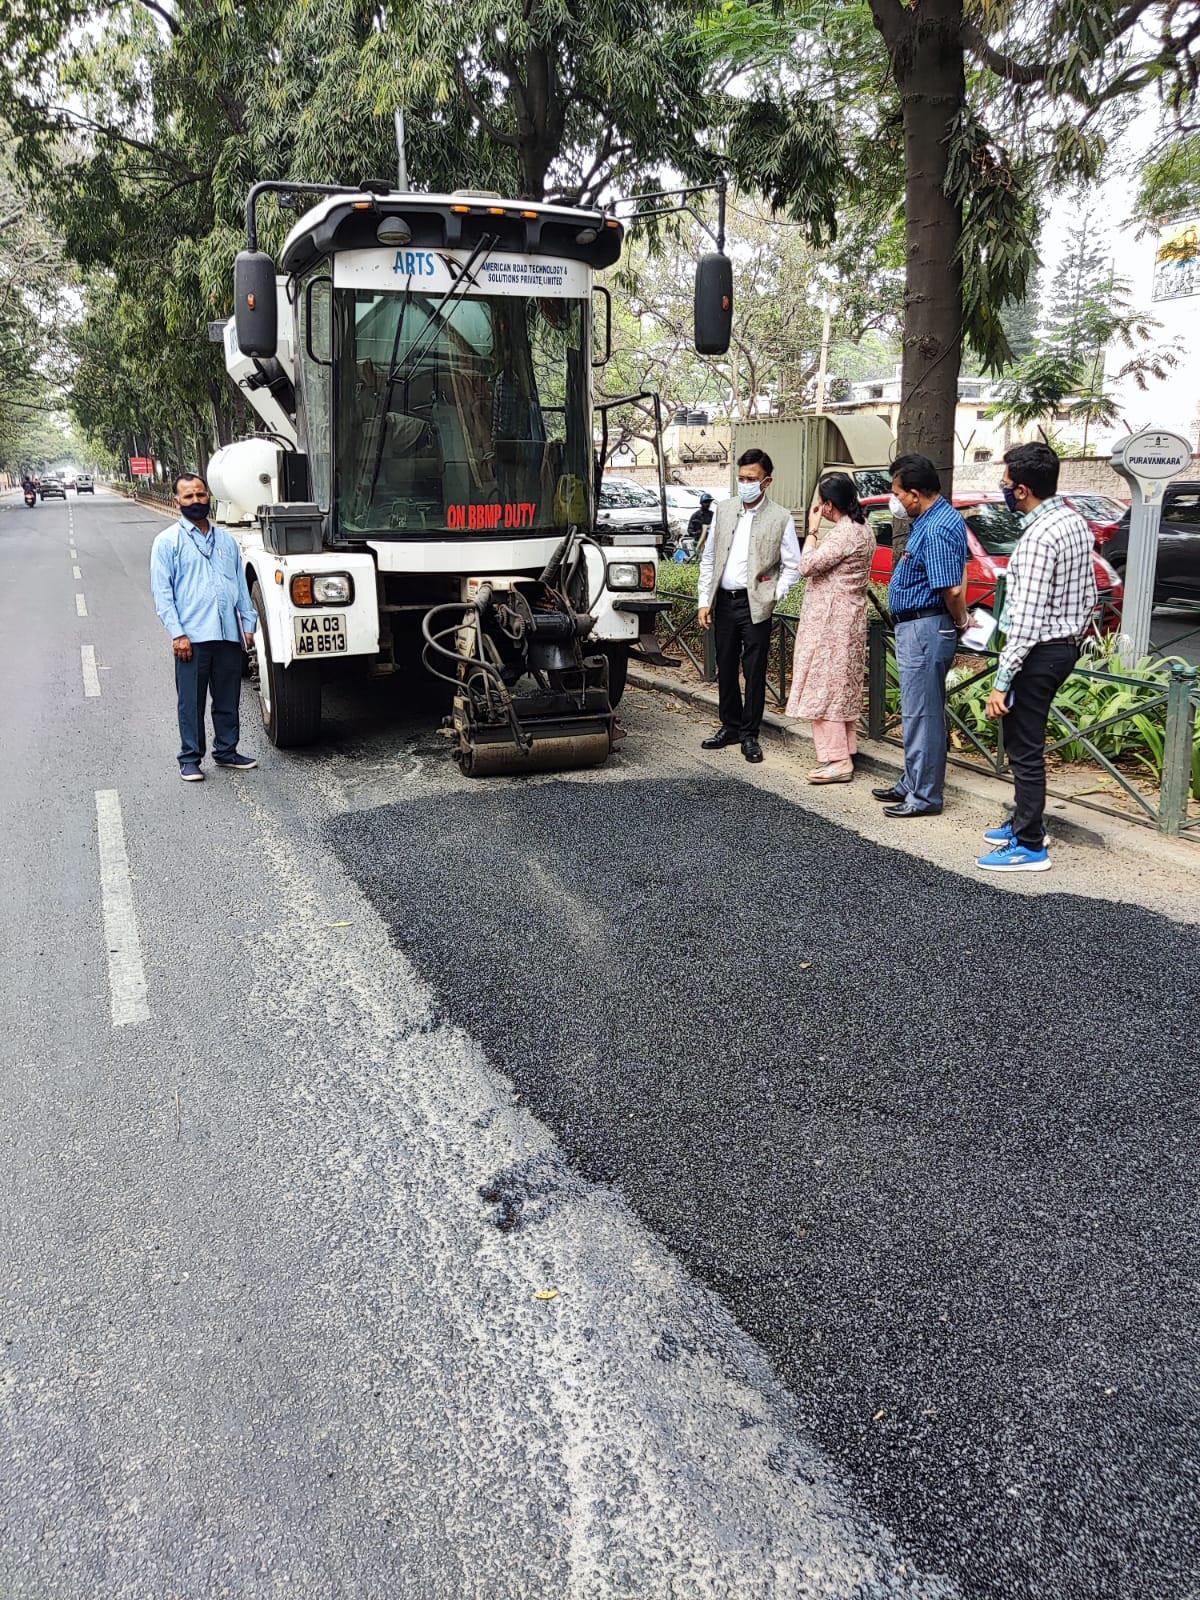 BBMP writes to govt. to terminate contract with company that runs Python pothole-filling machine